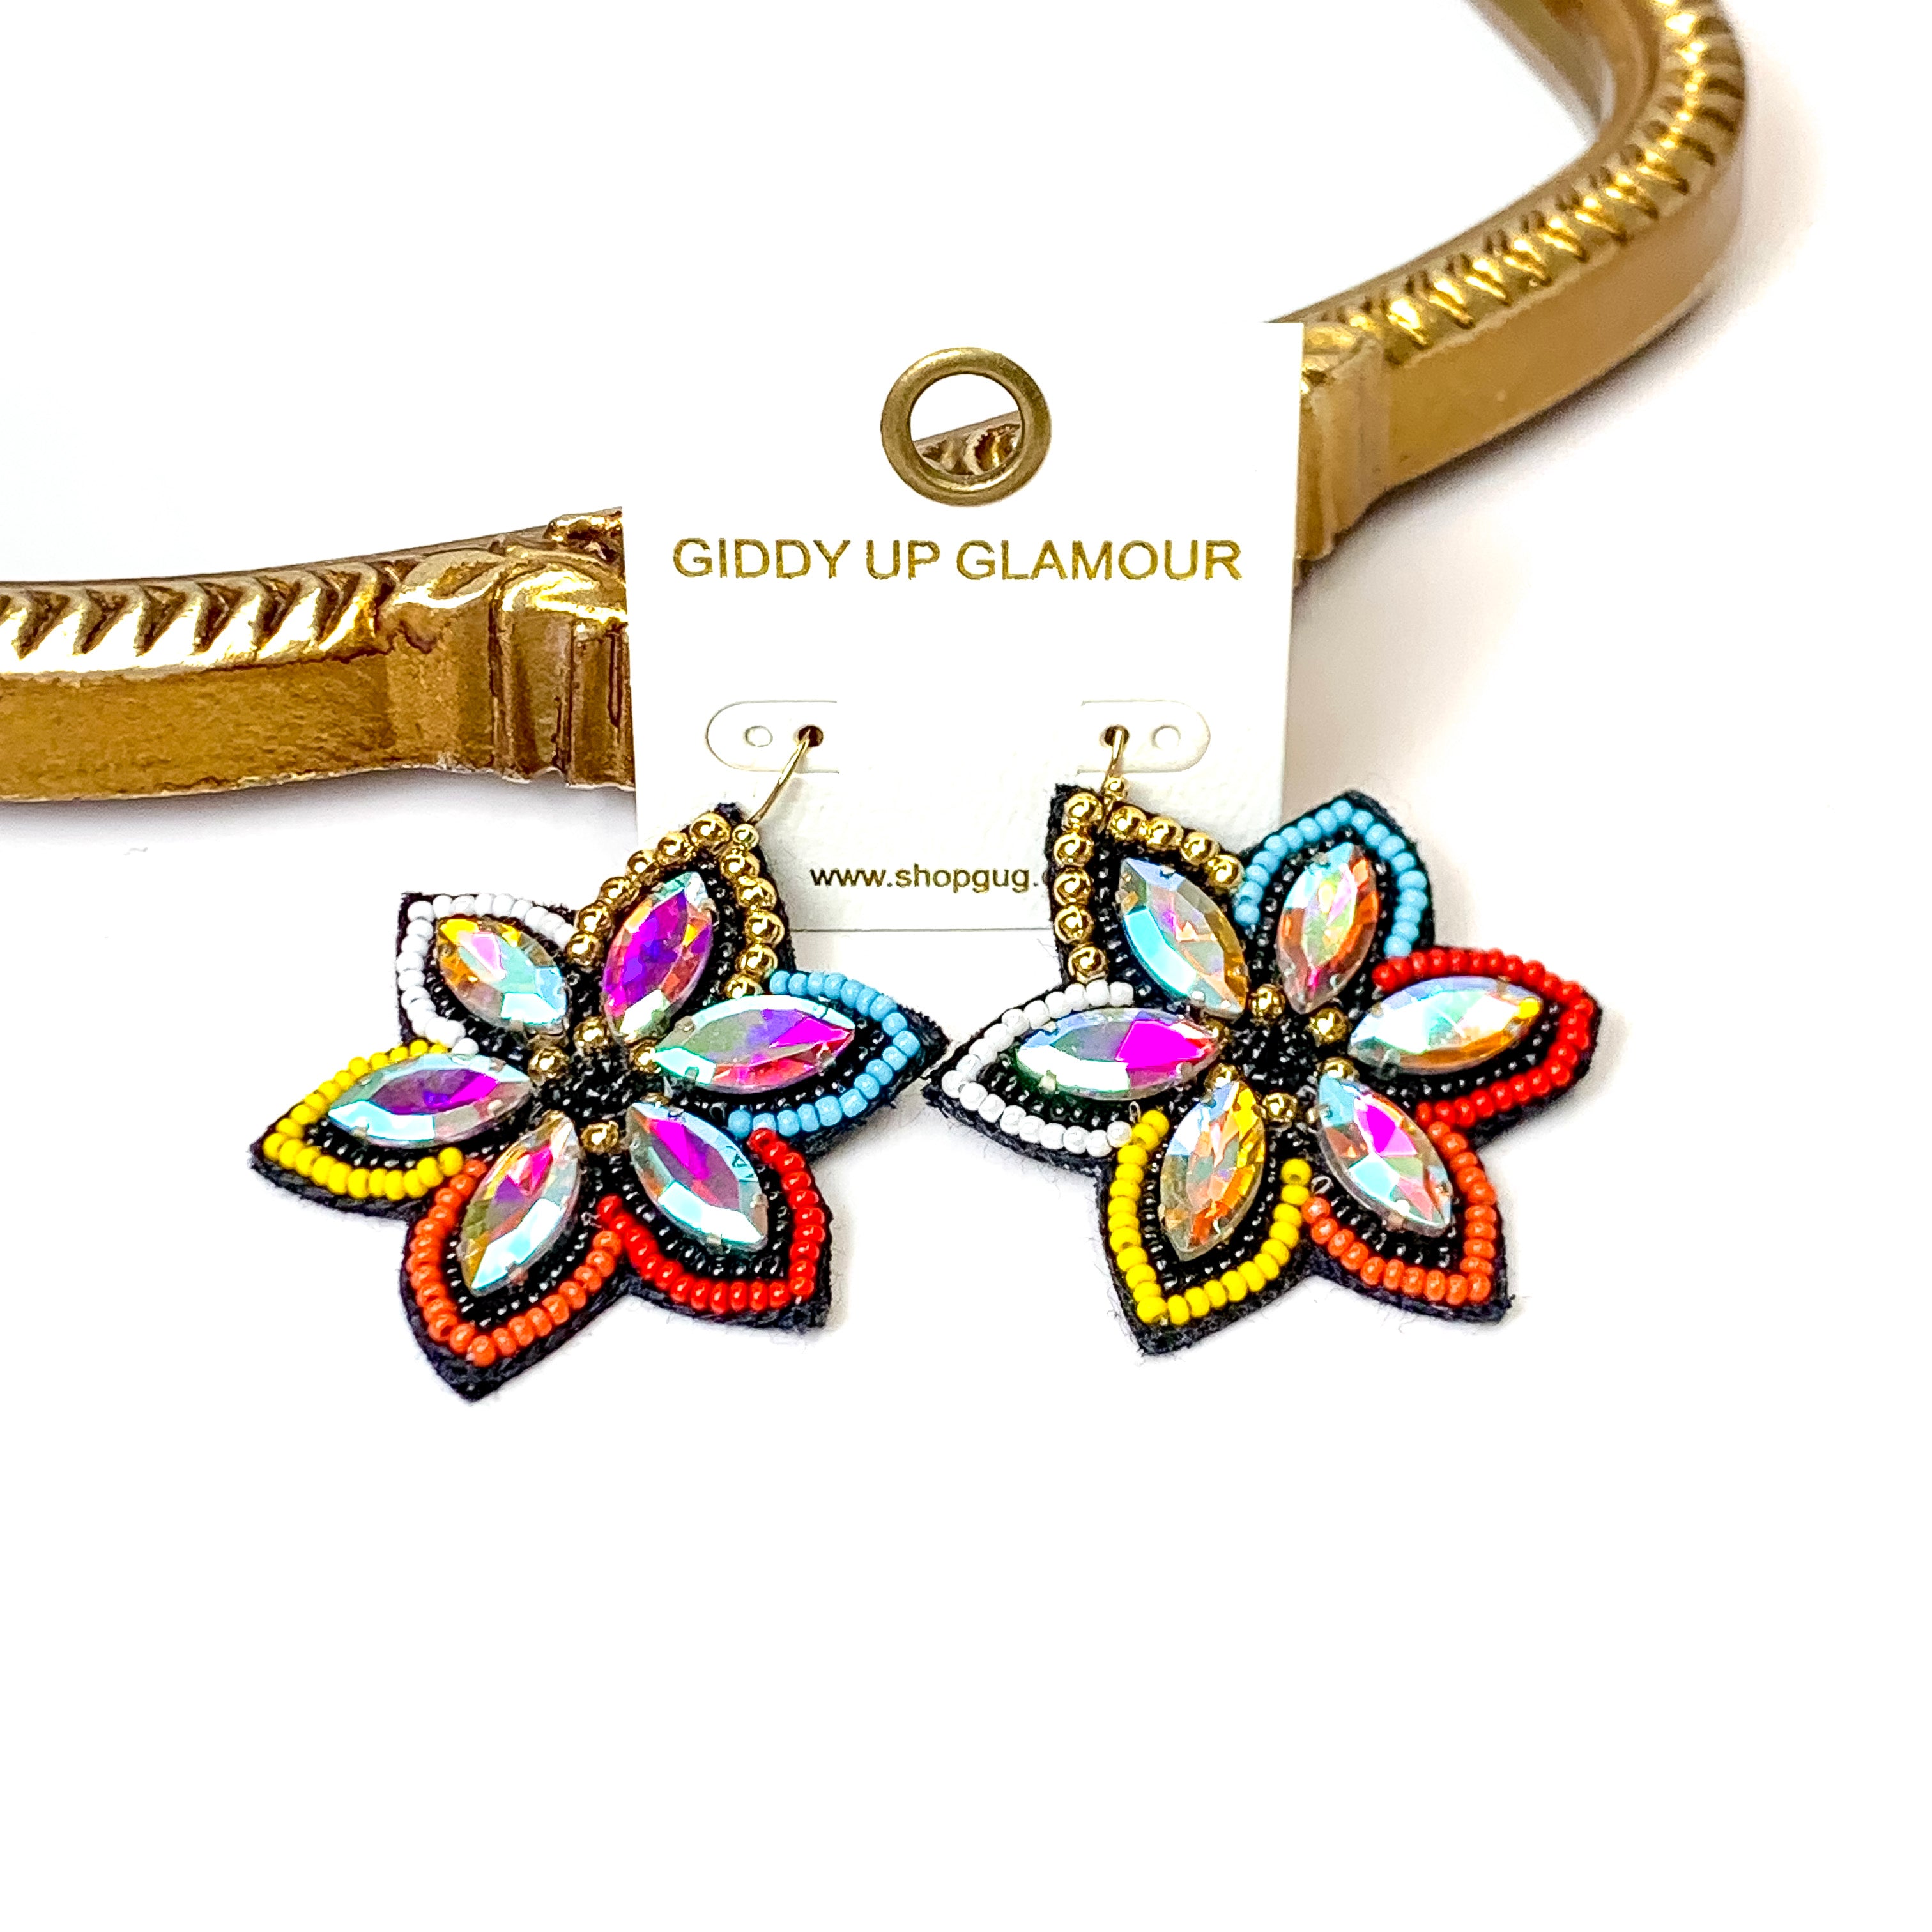 Desert Daisy Multicolored Flower Shaped Earrings with AB Crystal Accents in Black - Giddy Up Glamour Boutique